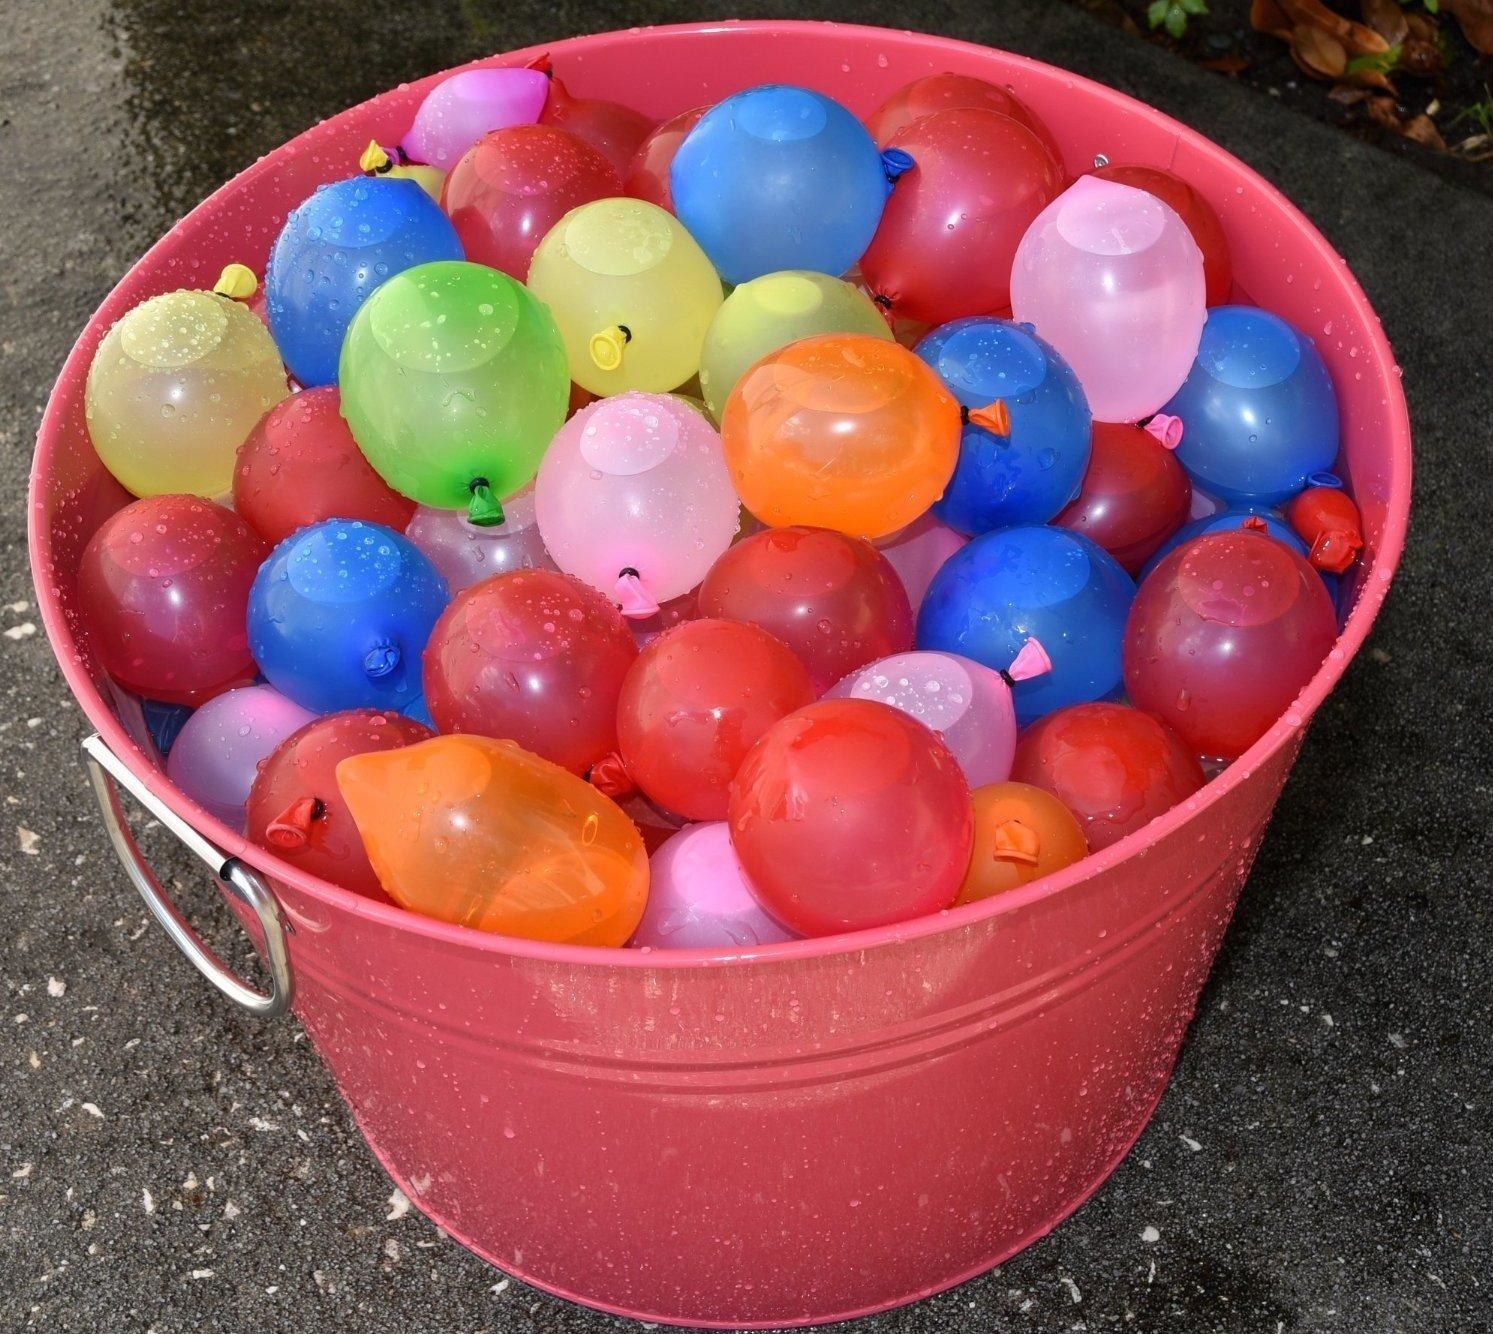 A bucket filled with colorful water balloons that are each filled and tied with water